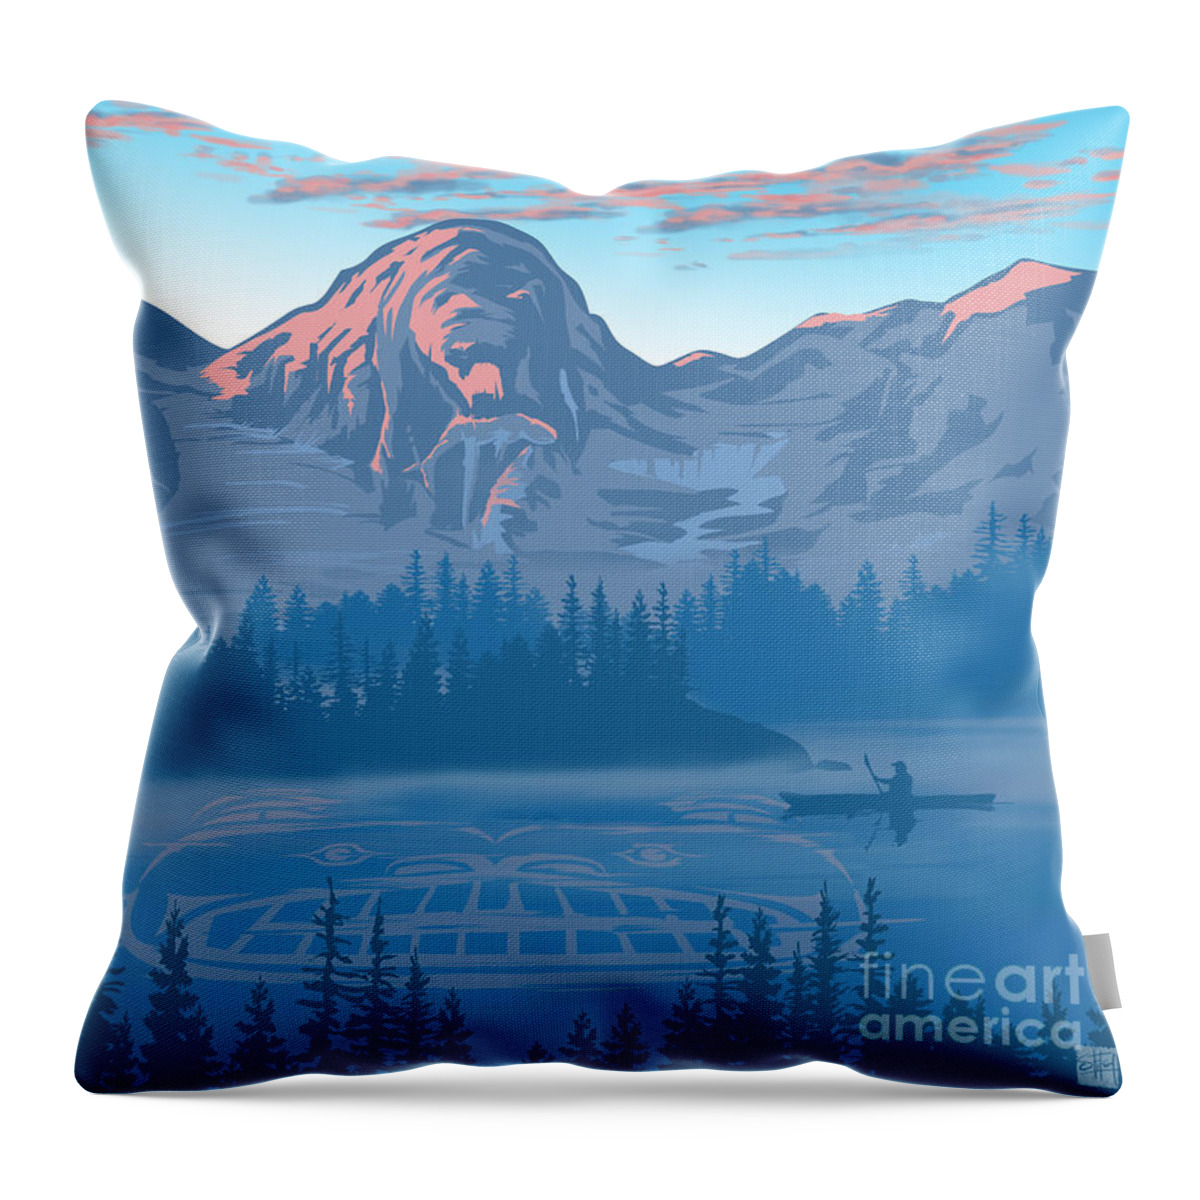 Bear Throw Pillow featuring the painting Bear Country scenic landscape by Sassan Filsoof